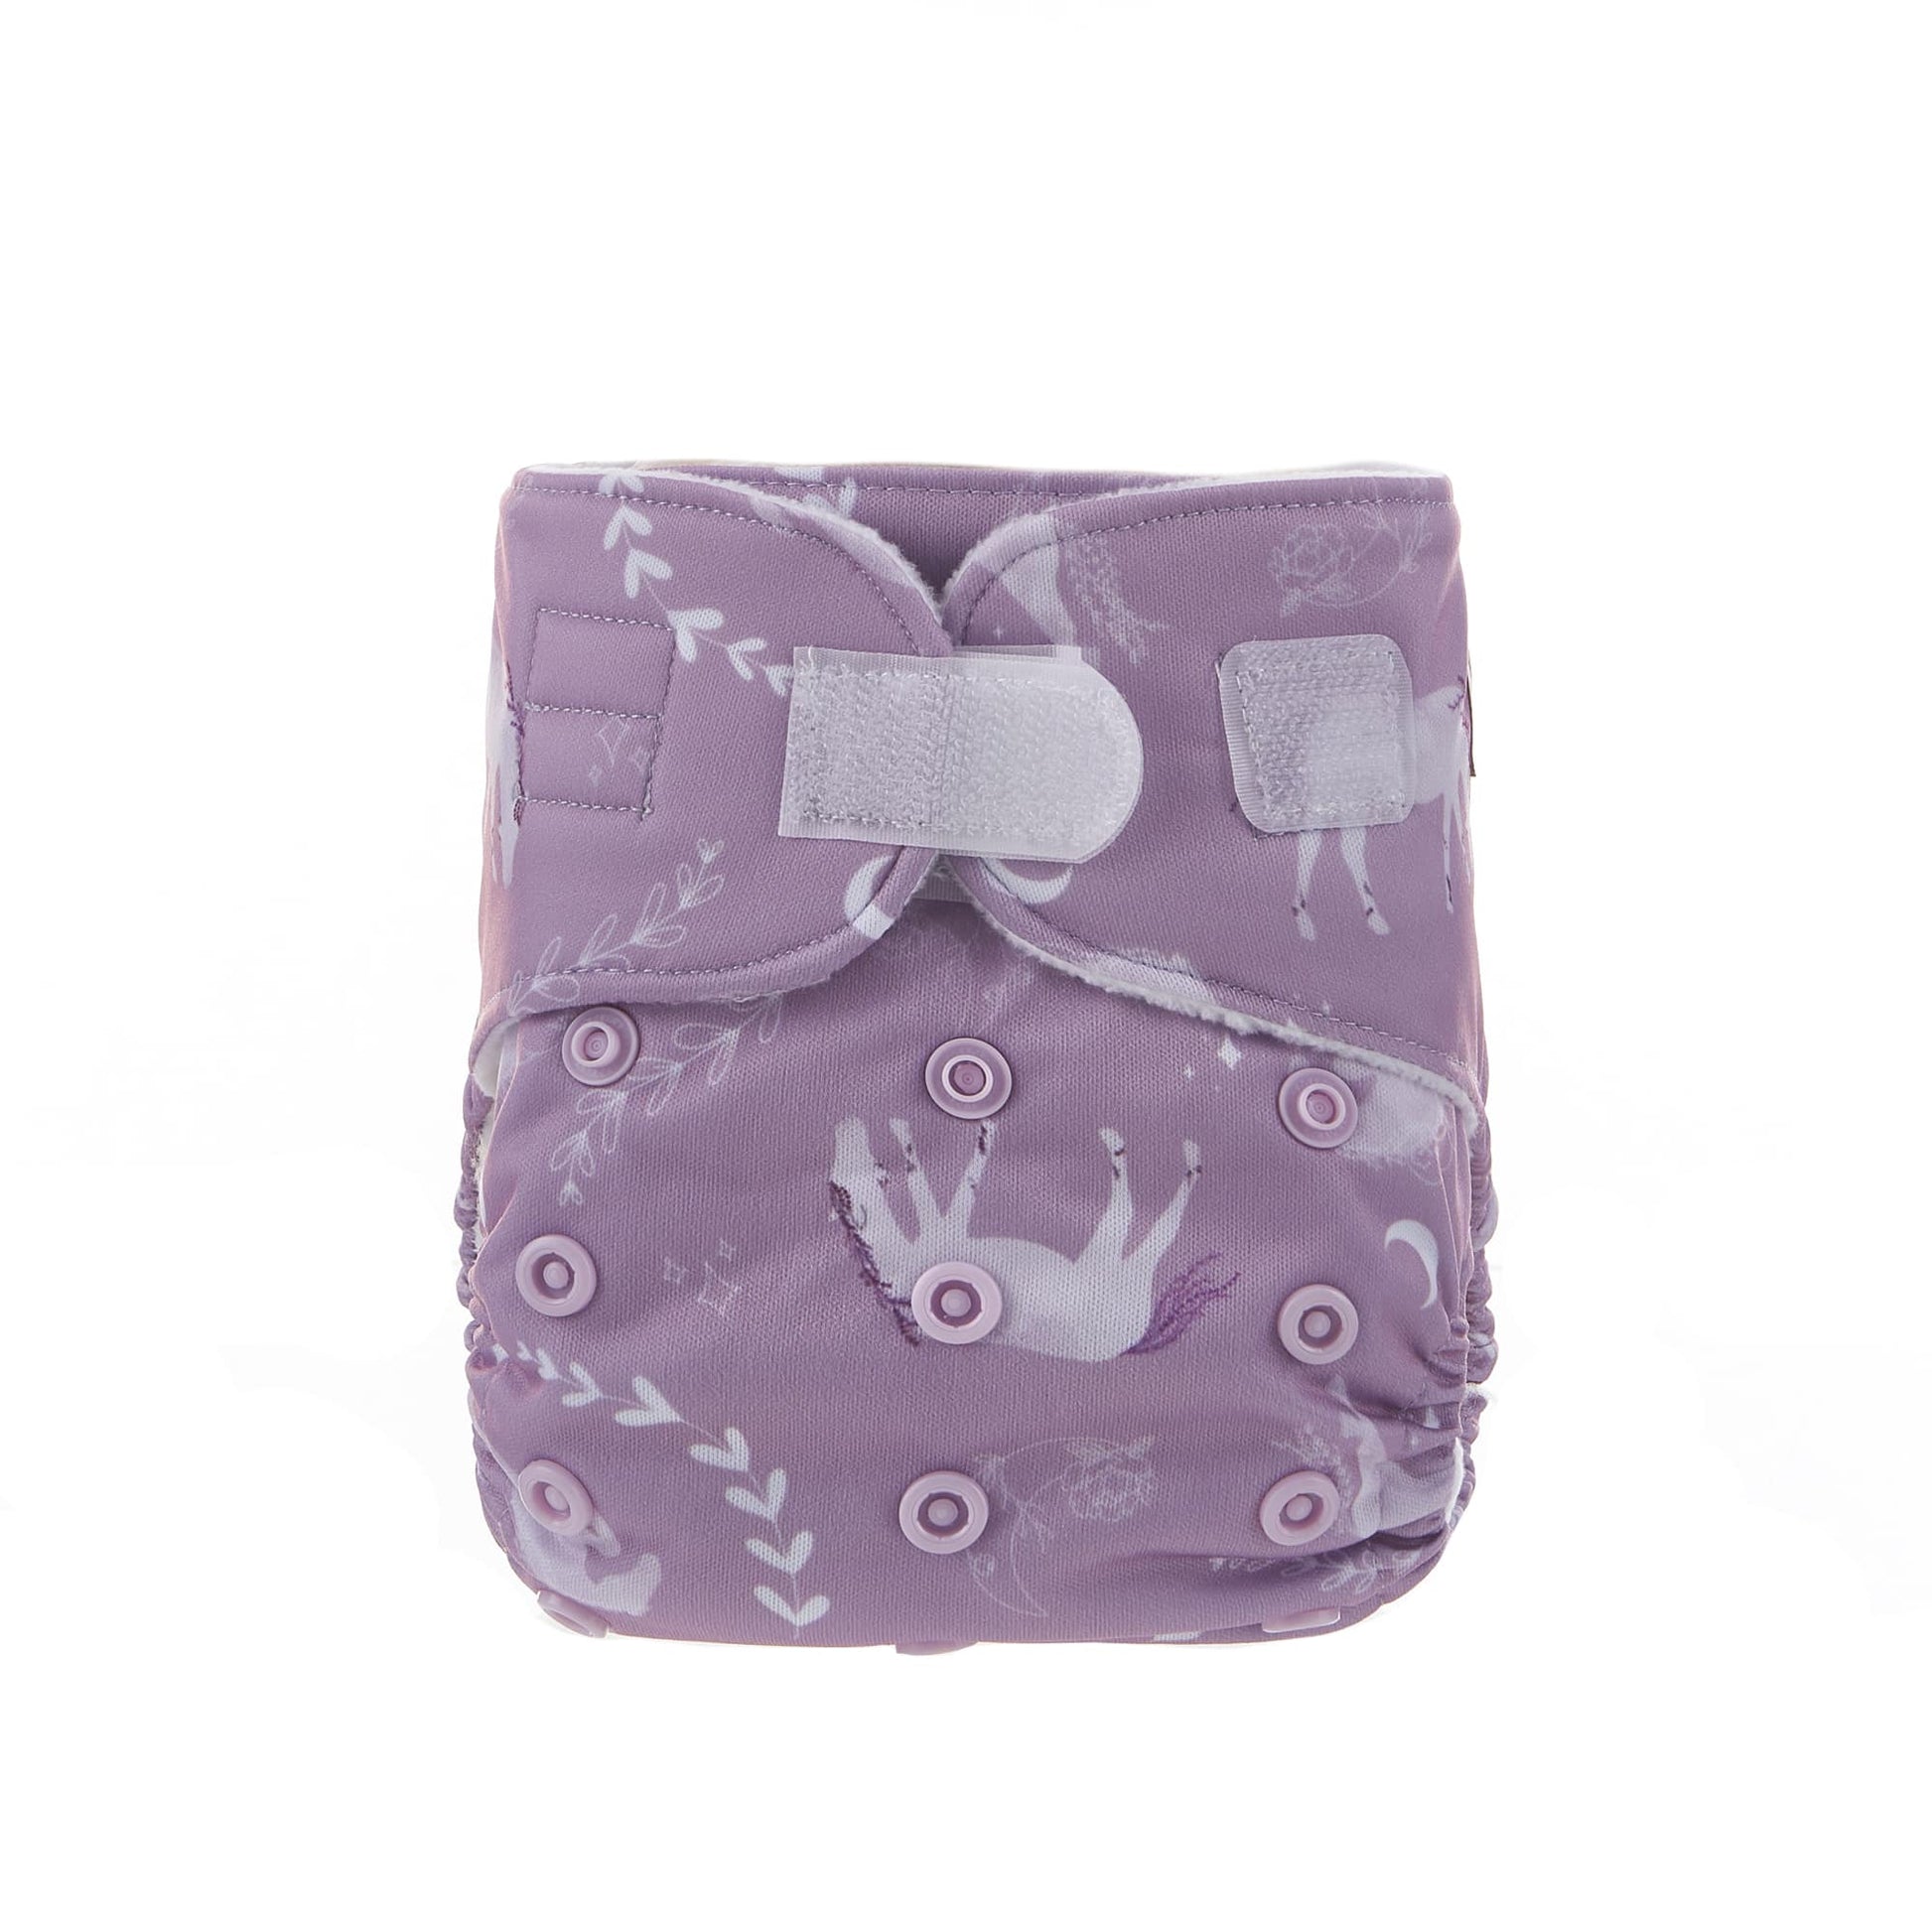 Newborn nappy with velcro fastening and pink horse pattern.